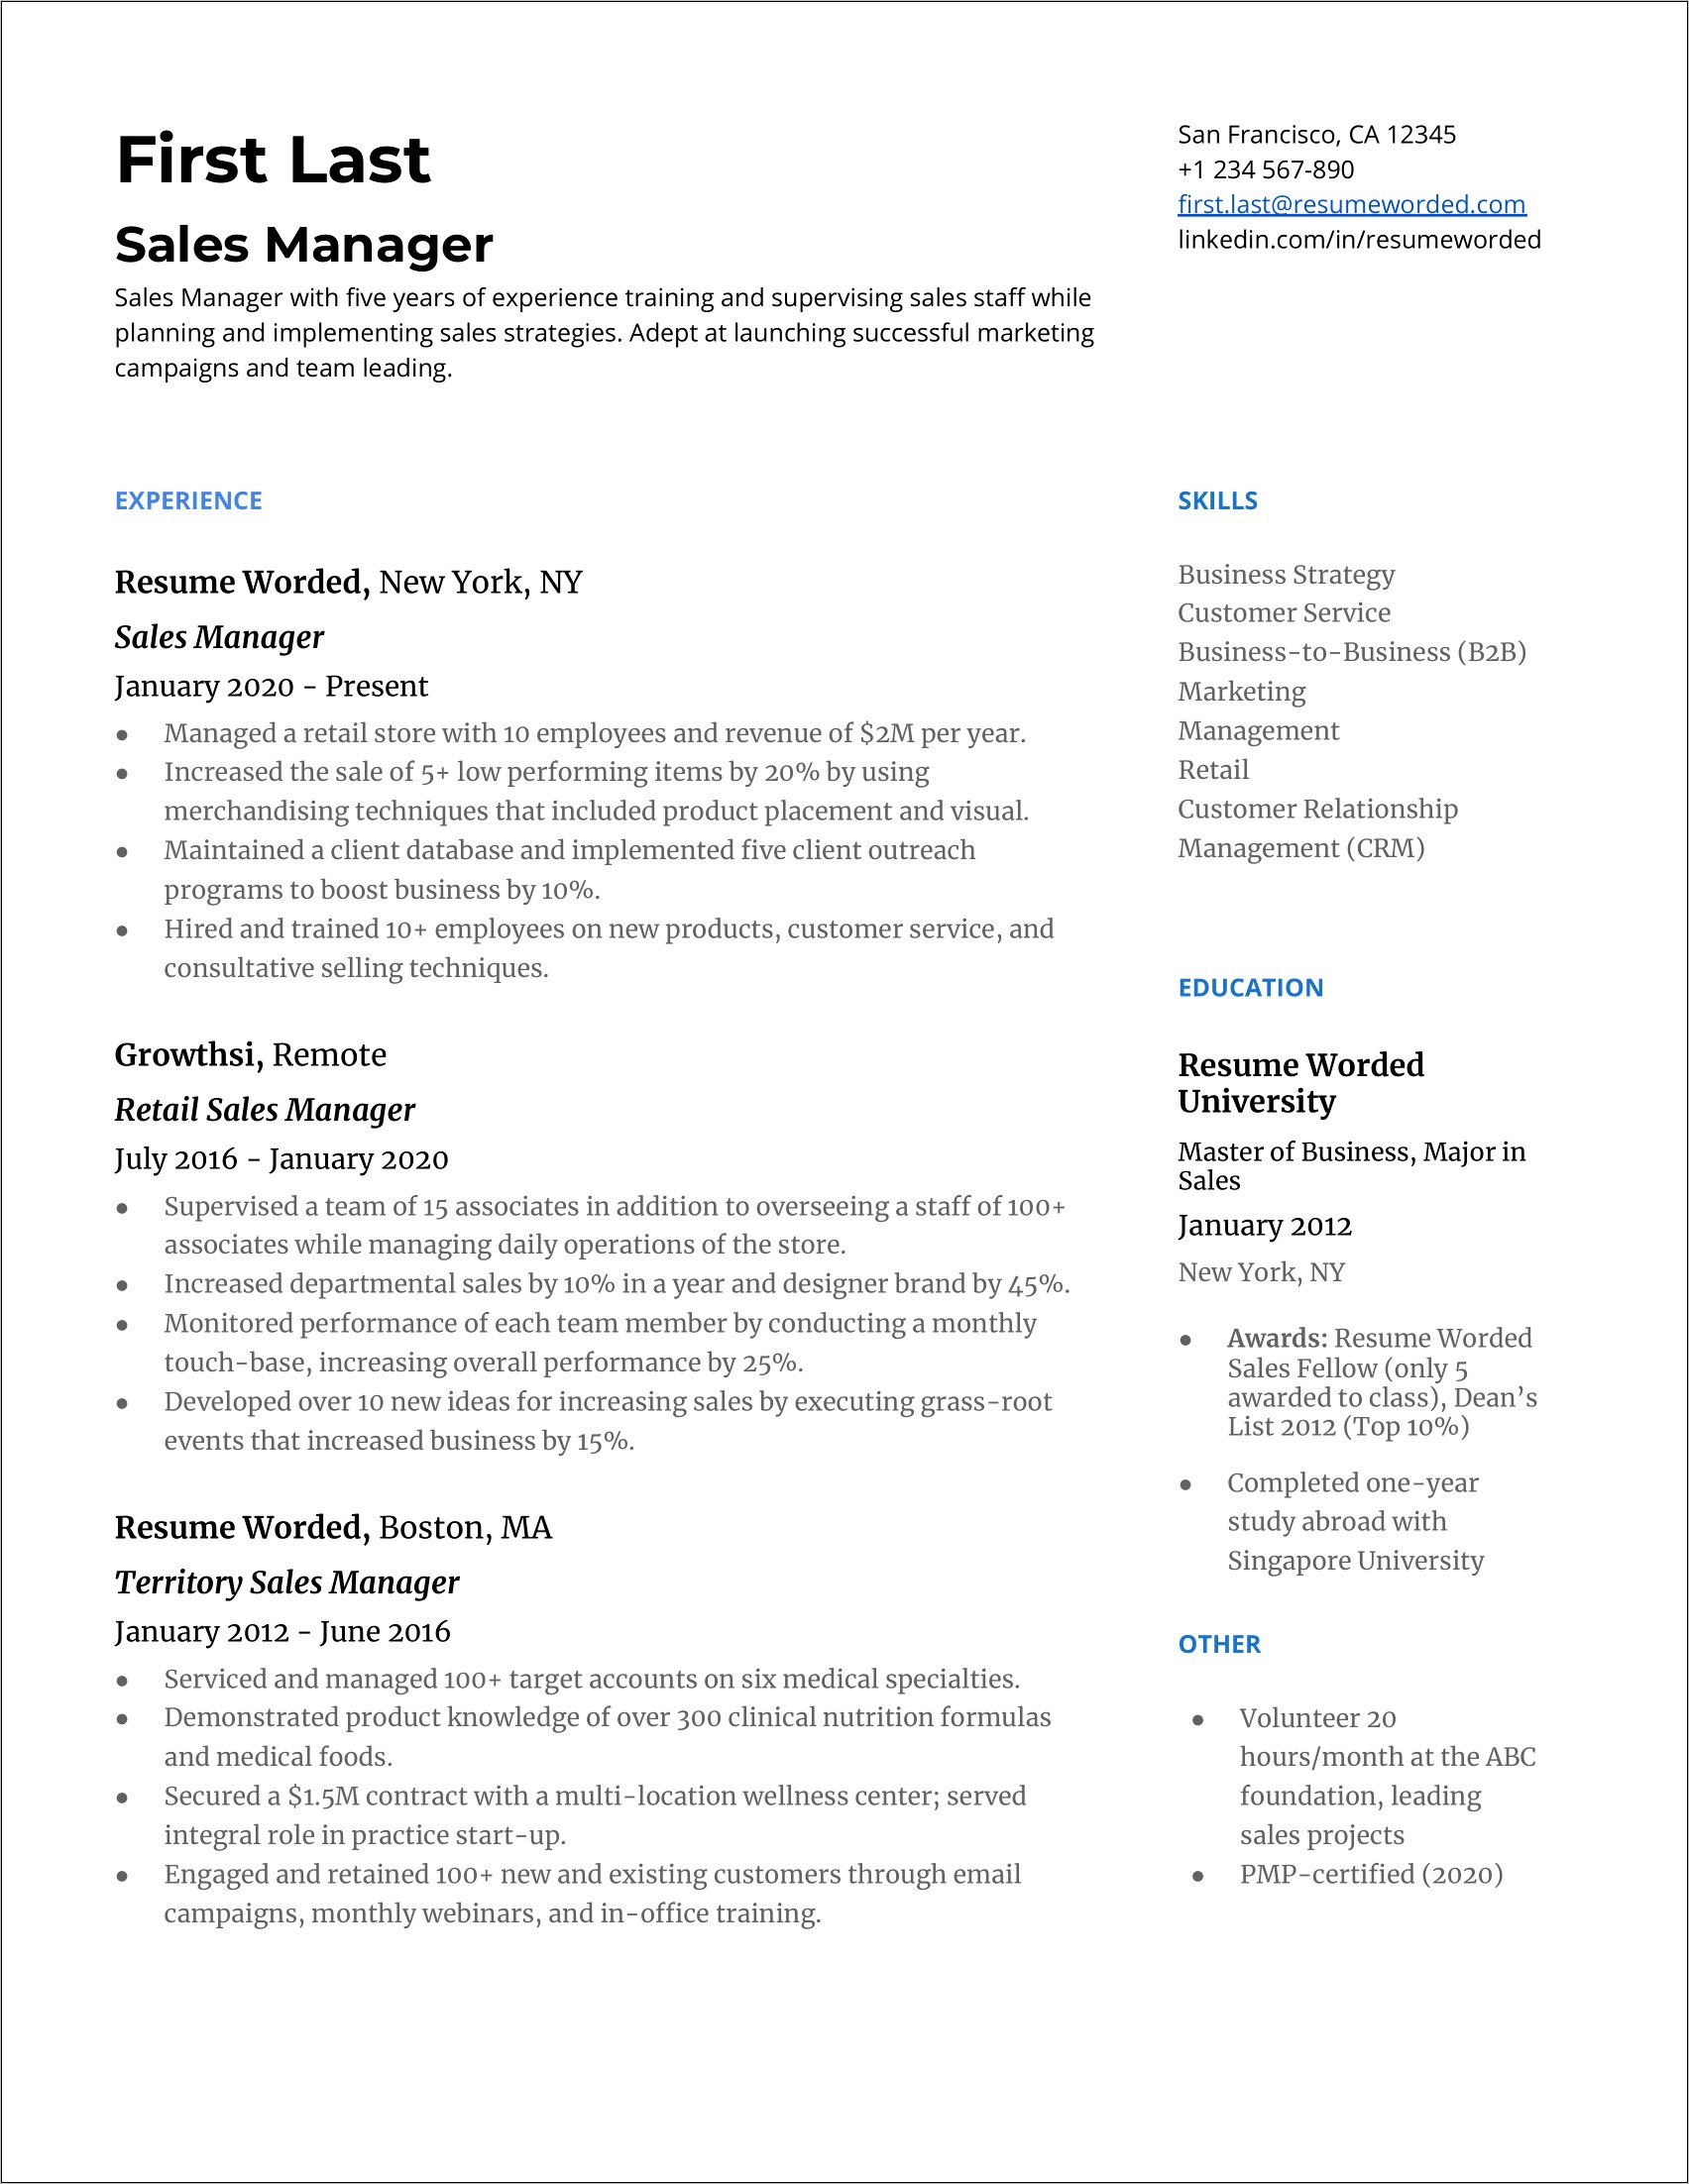 Job Resume Moving Experience Order